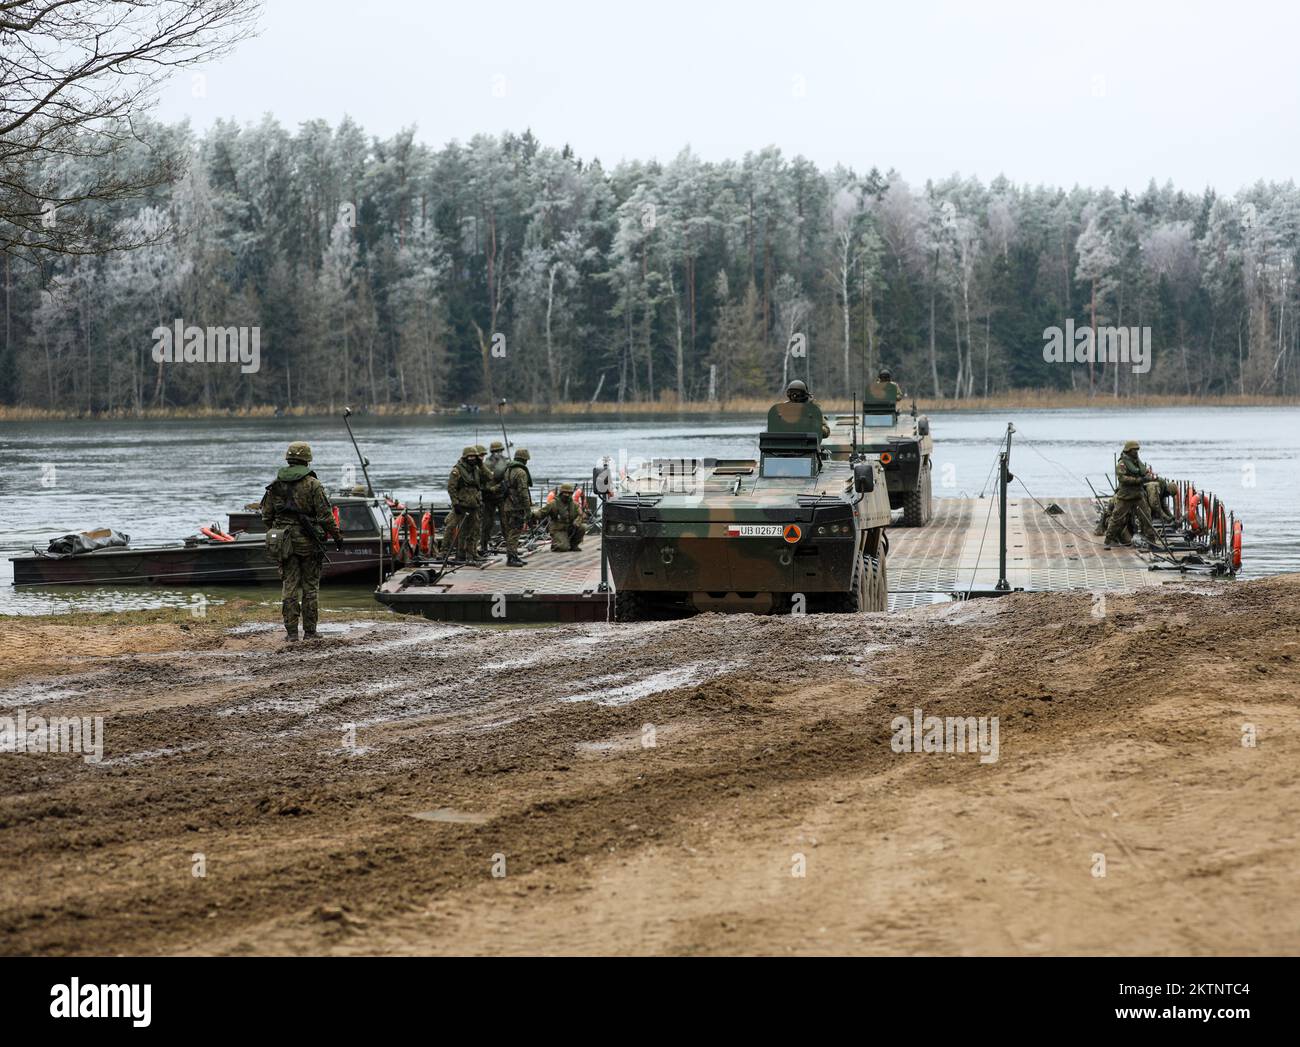 Polish soldiers assigned to 20th Mechanized Brigade utilize a floating pontoon bridge to ferry Armored Multi-Purpose Vehicle (AMPV) across a lake while conducting amphibious assault operations during the Bull Run training exercise at Bemowo Piskie, Poland, Nov. 24, 2022. The 20th Mechanized Brigade is proudly working alongside the 1st Infantry Division, NATO allies and regional security partners to provide combat-credible forces to V Corps, under America's forward deployed corps in Europe. (U.S. Army National Guard photo by Sgt. Gavin K. Ching) Stock Photo